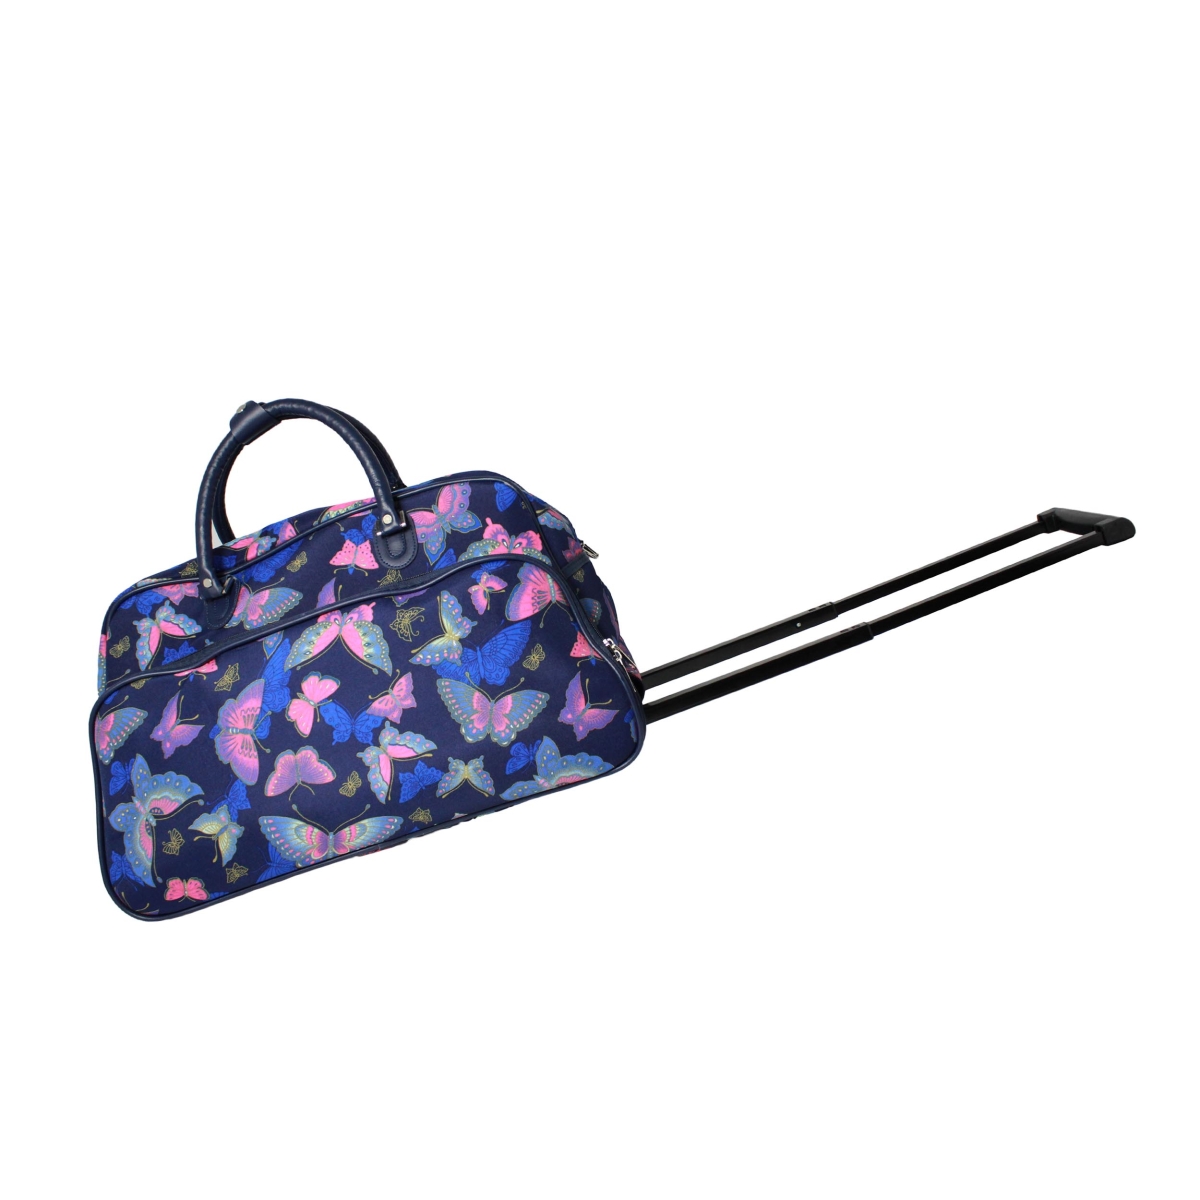 8112022-196 21 In. Carry On Rolling Duffle Bag - Blue Butterfly